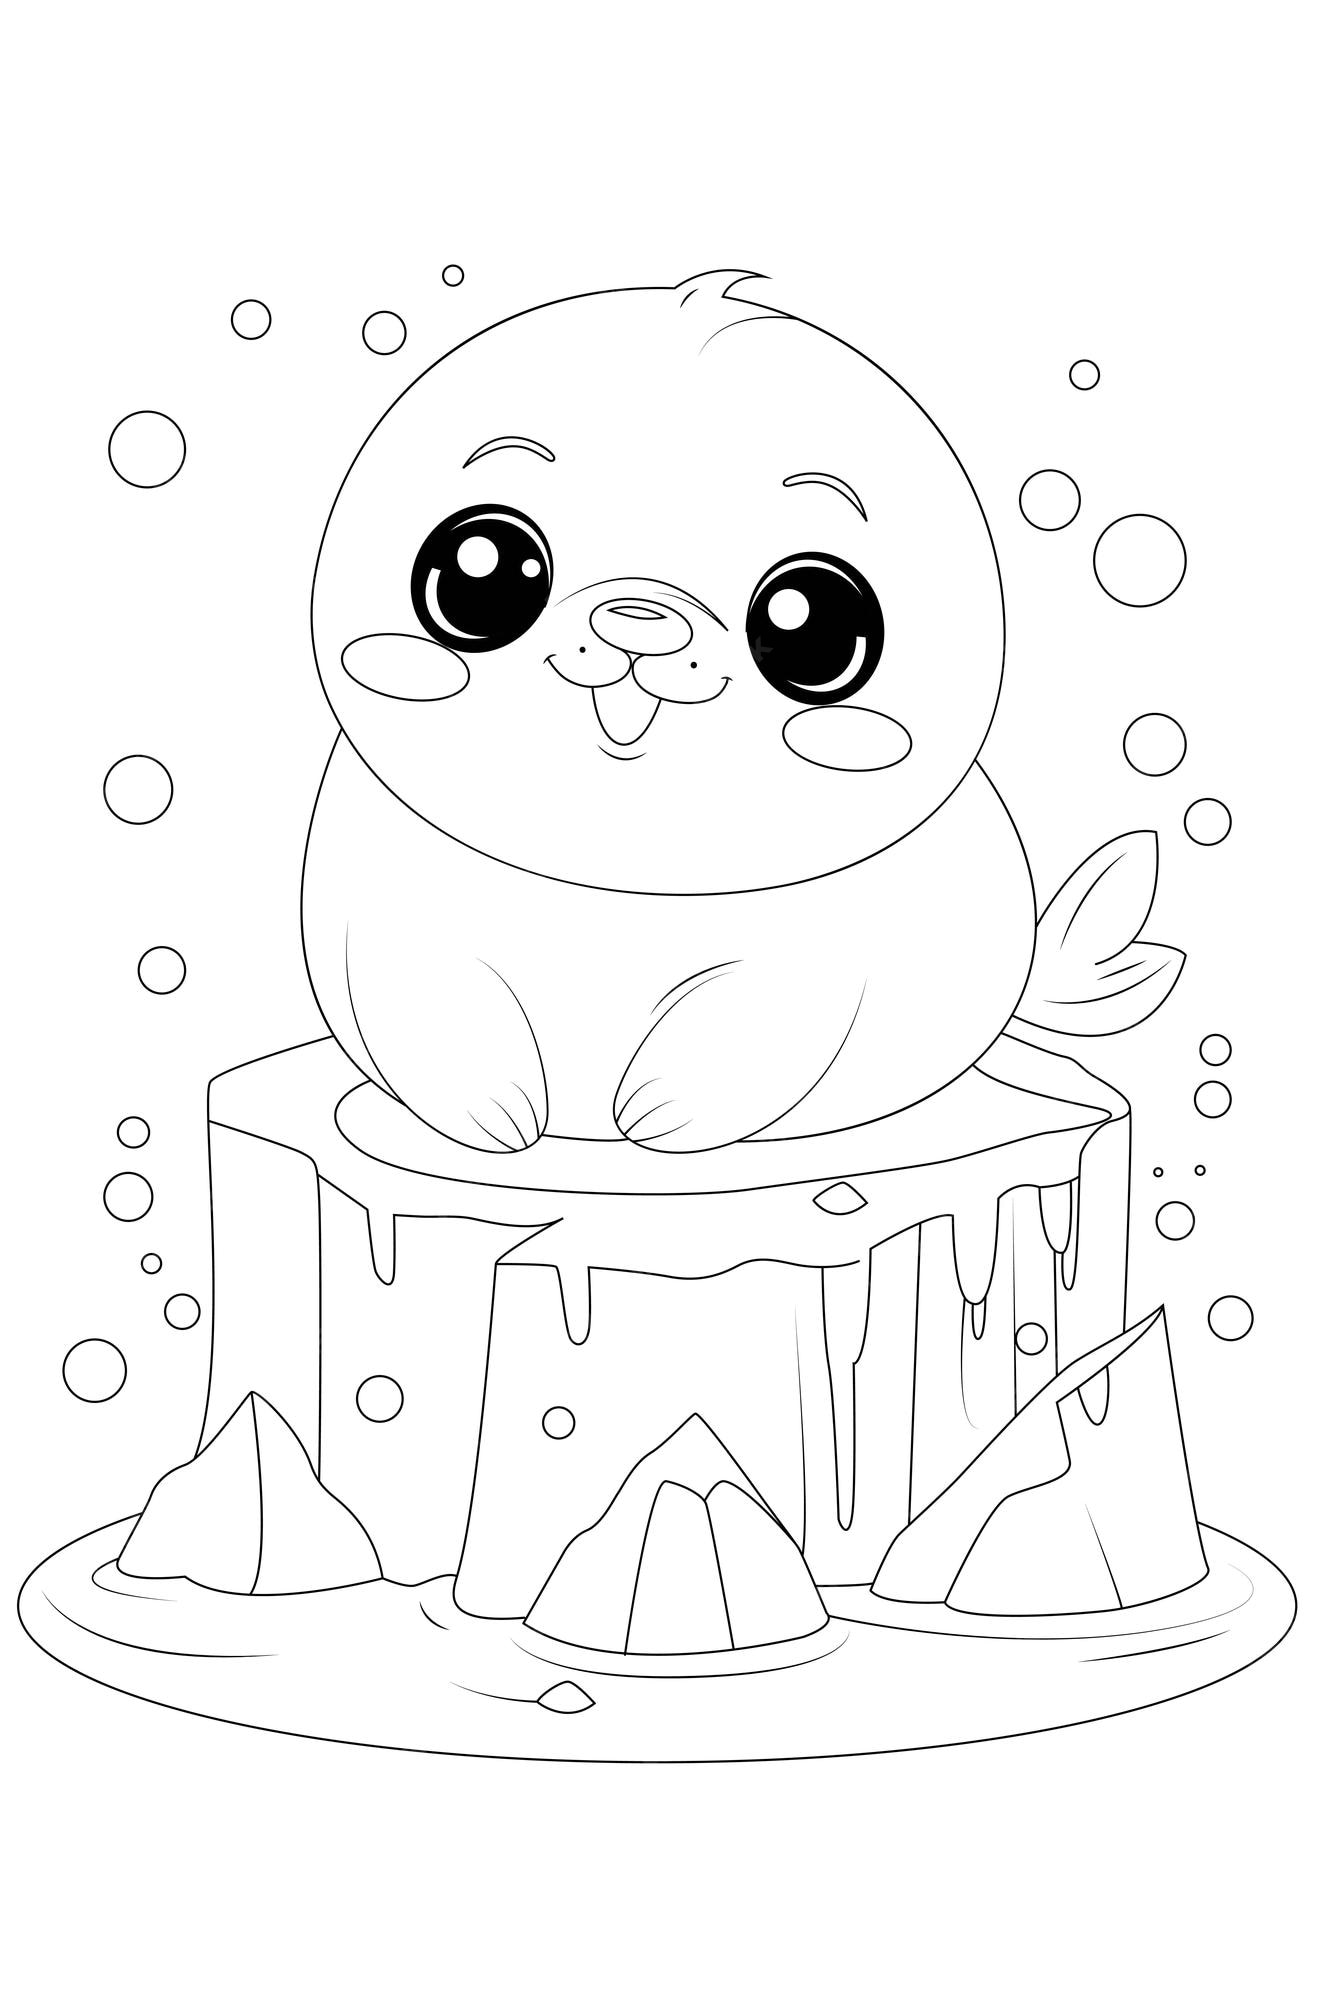 Premium vector coloring page of a cute chubby baby seal on an iceberg